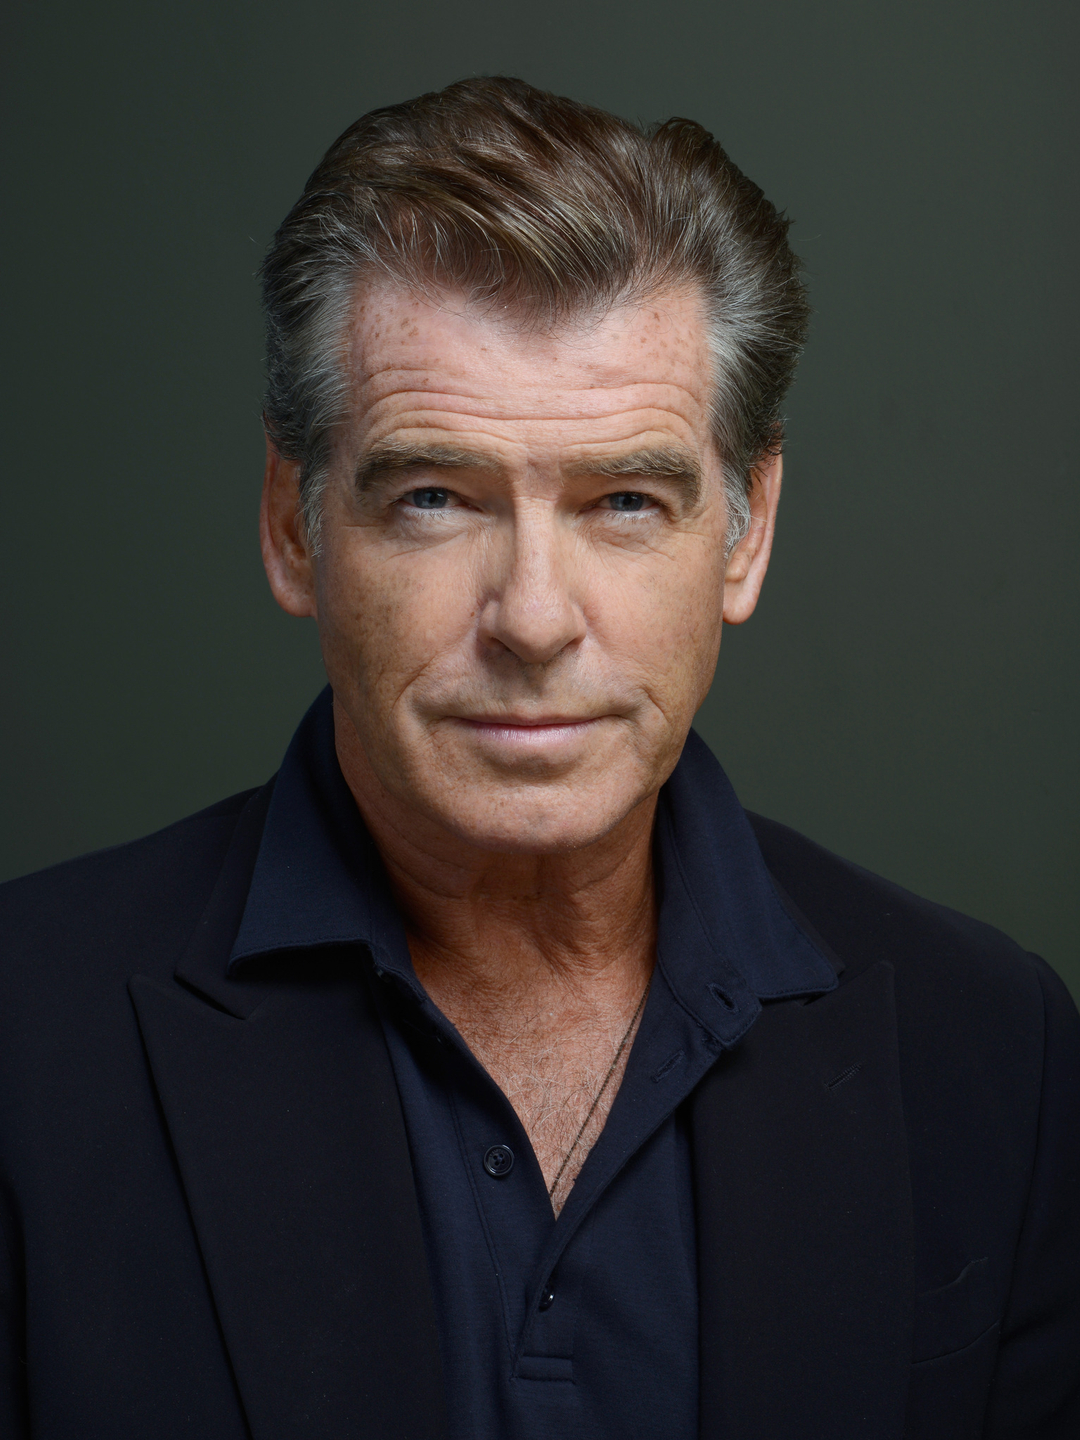 Pierce Brosnan does he have a wife